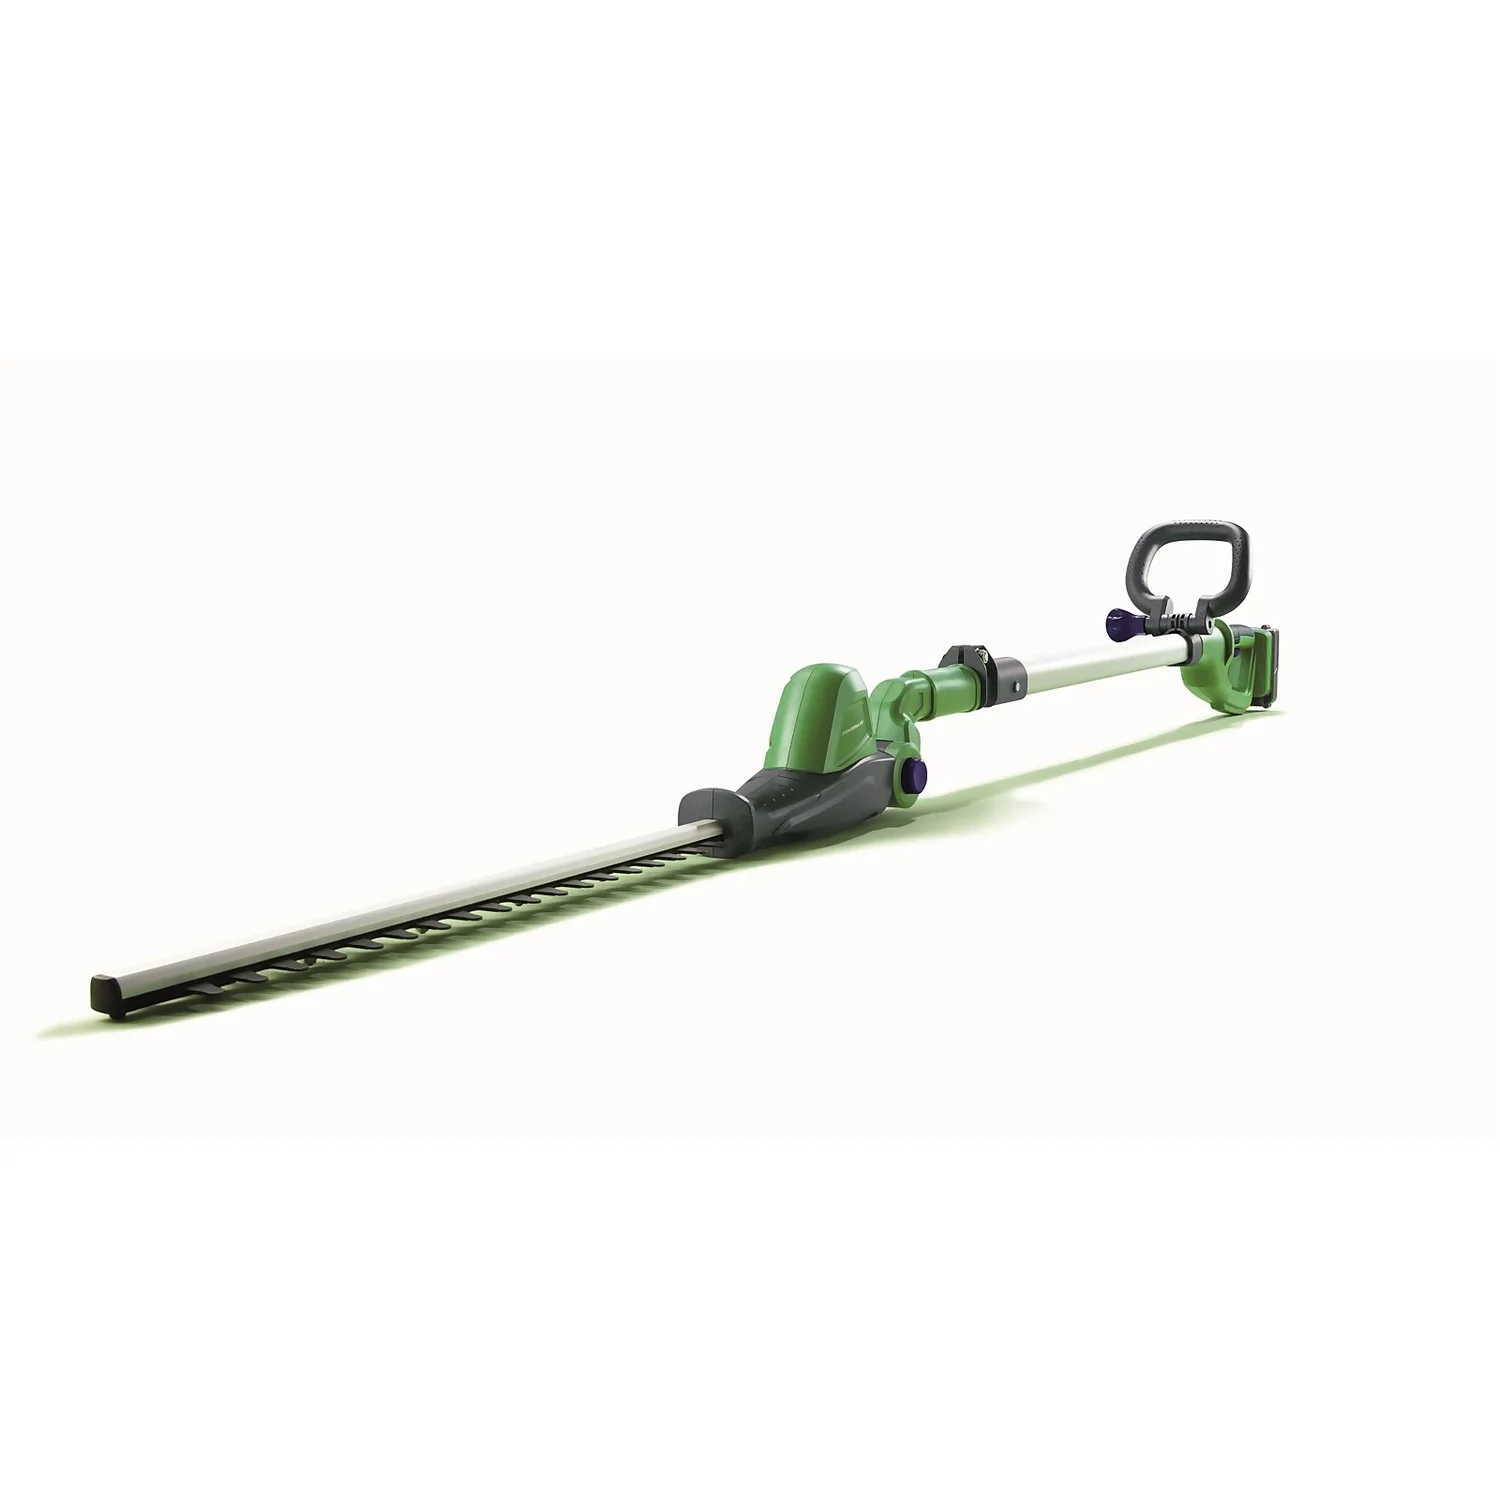 Image of Save &pound20: Powerbase 20V Cordless Pole Hedge Trimmer 41cm
